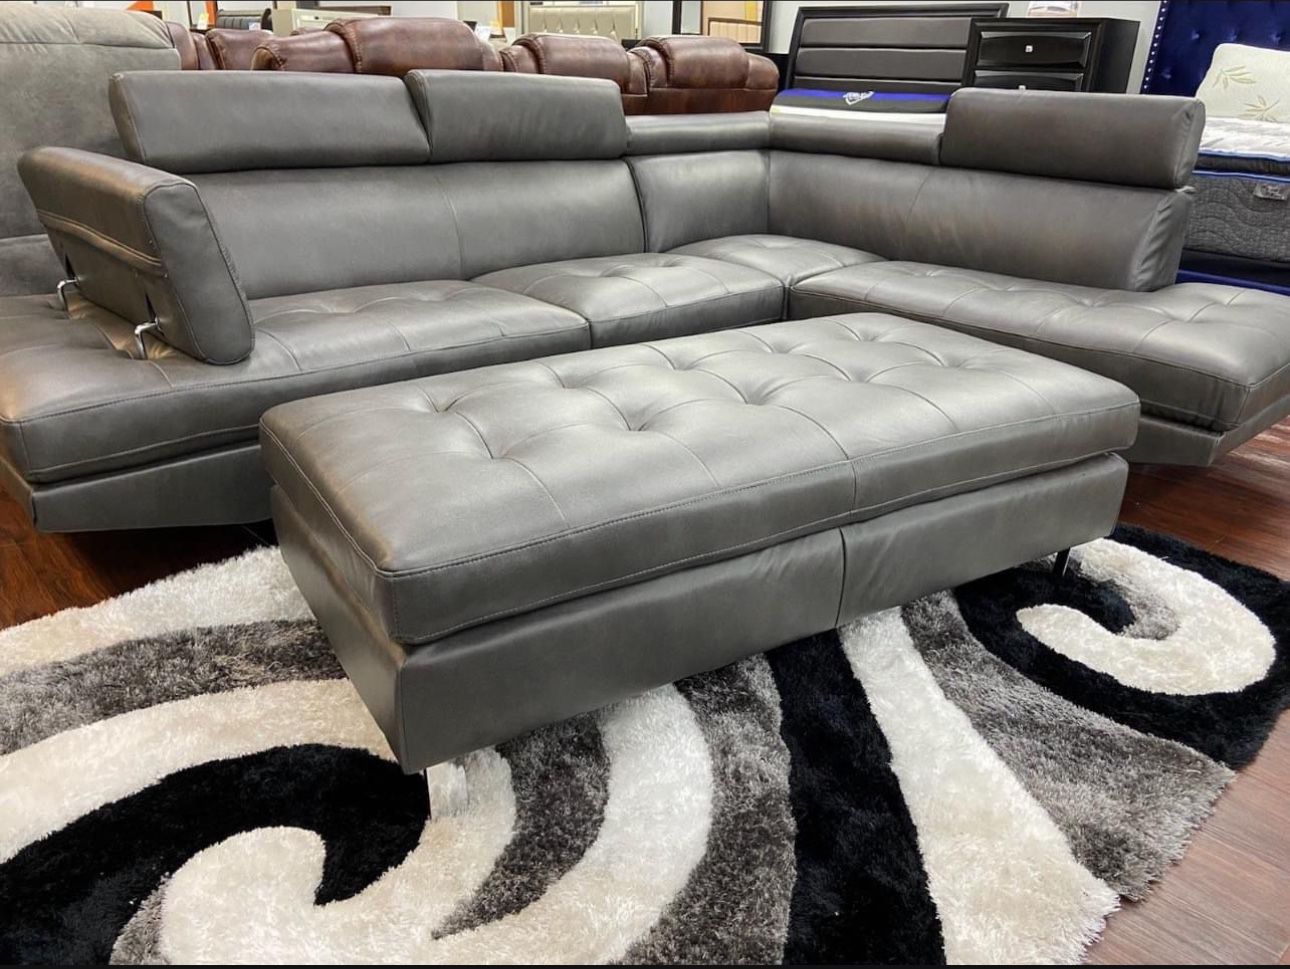 COMFY NEW IBIZA SECTIONAL SOFA AND OTTOMAN SET ON SALE ONLY $799. IN STOCK SAME DAY DELIVERY 🚚 EASY FINANCING 